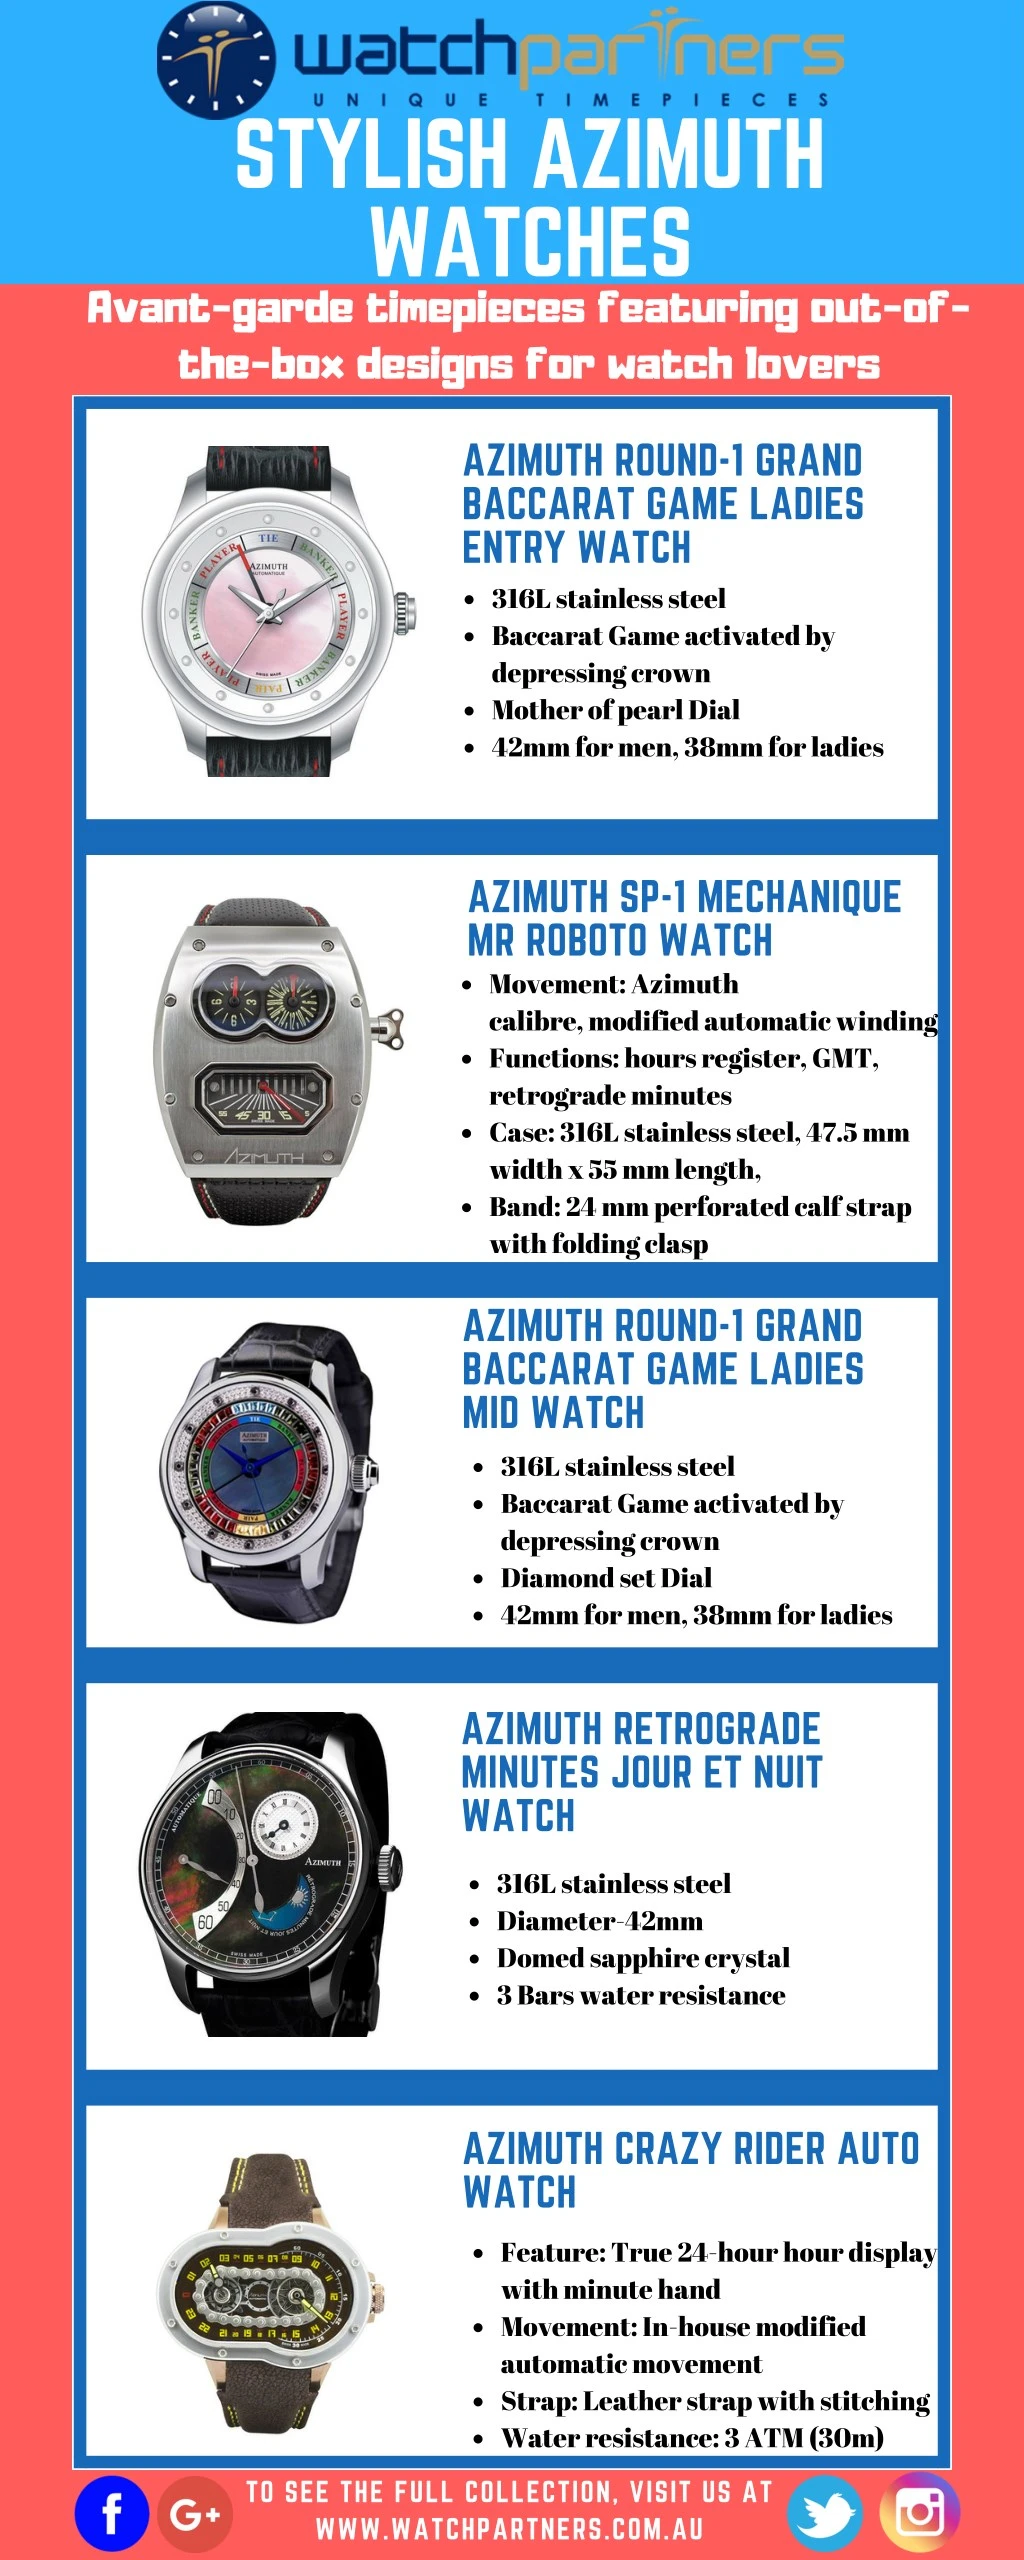 stylish azimuth watches avant garde timepieces